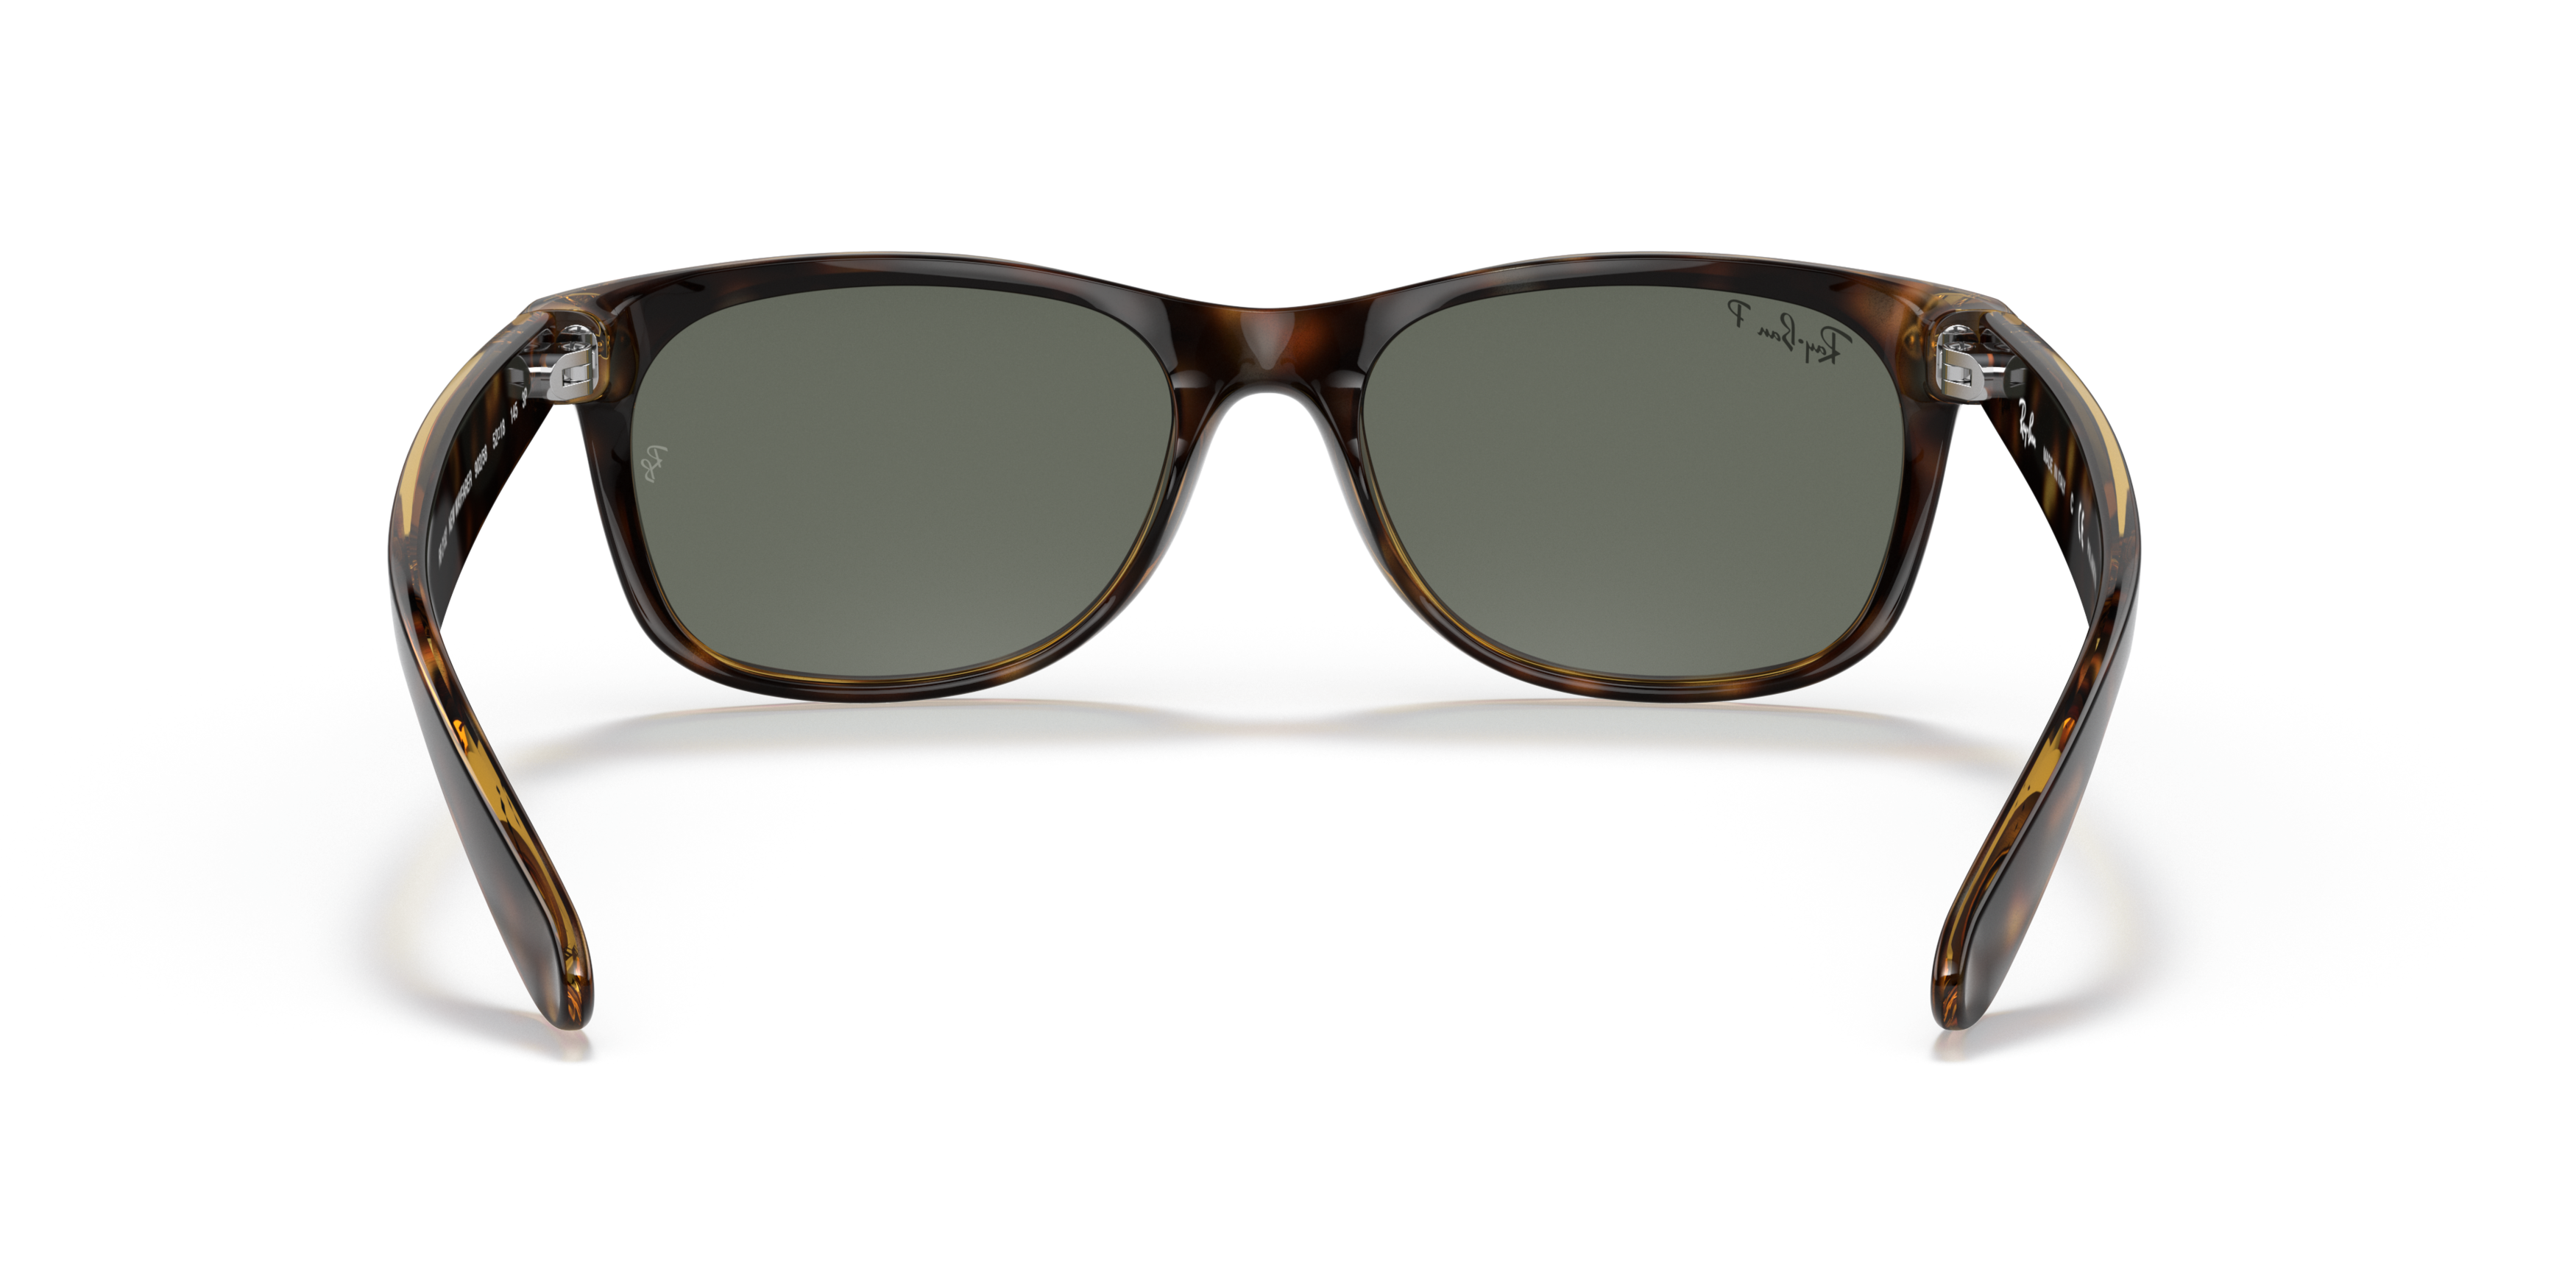 [products.image.detail02] Ray-Ban NEW WAYFARER RB2132 902/58